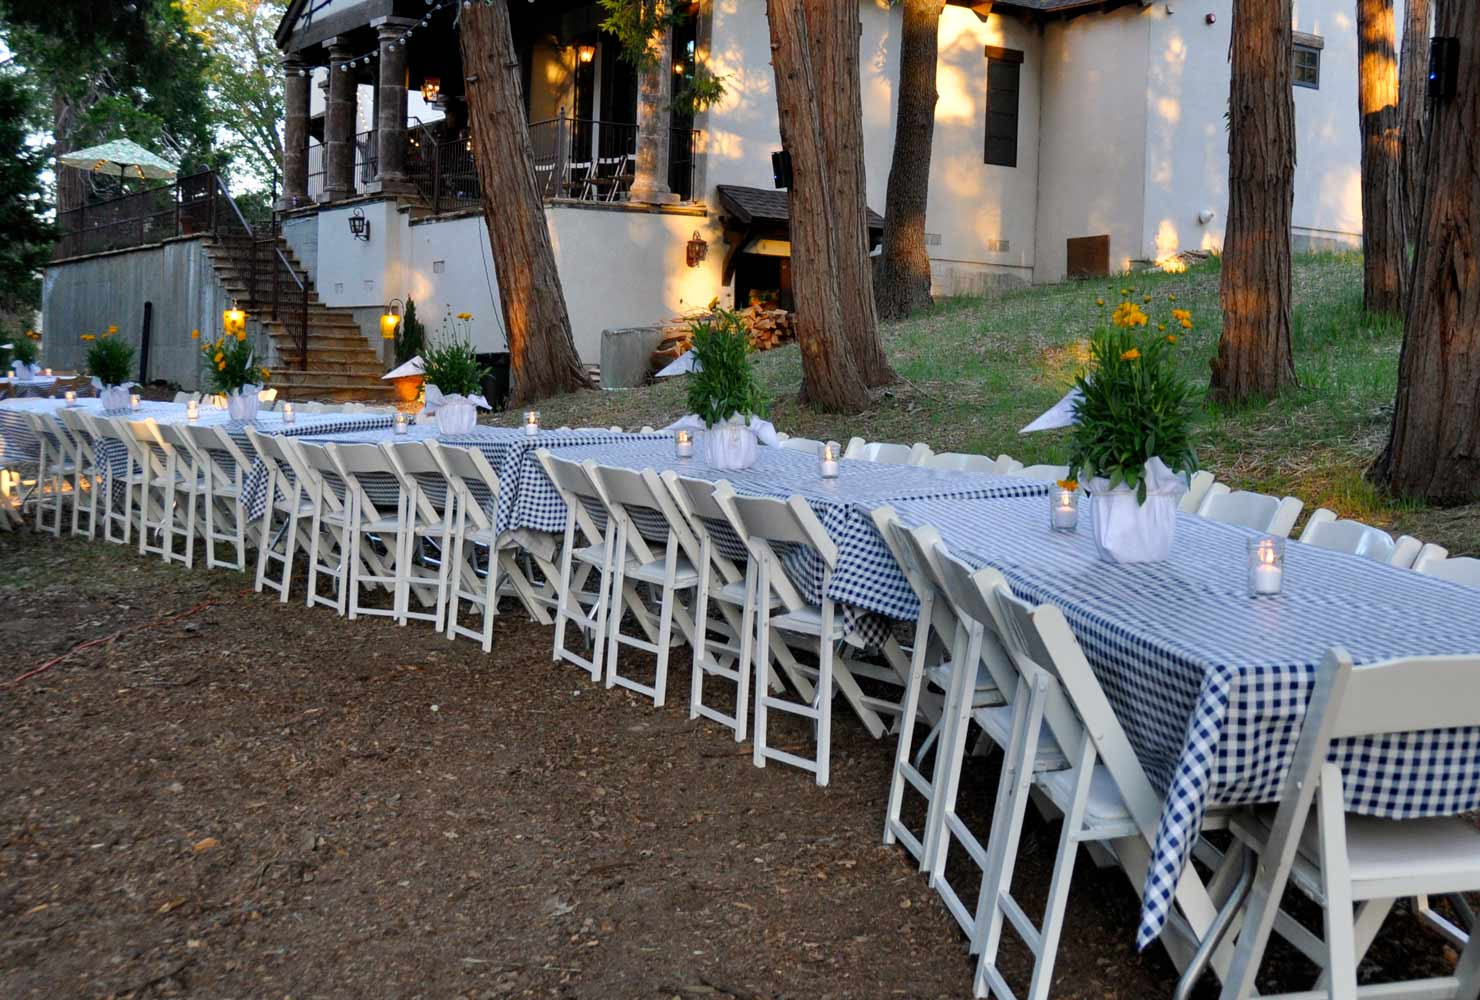 Graduation Party Ideas For Backyard
 10 Some of the Coolest Designs of How to Make Graduation